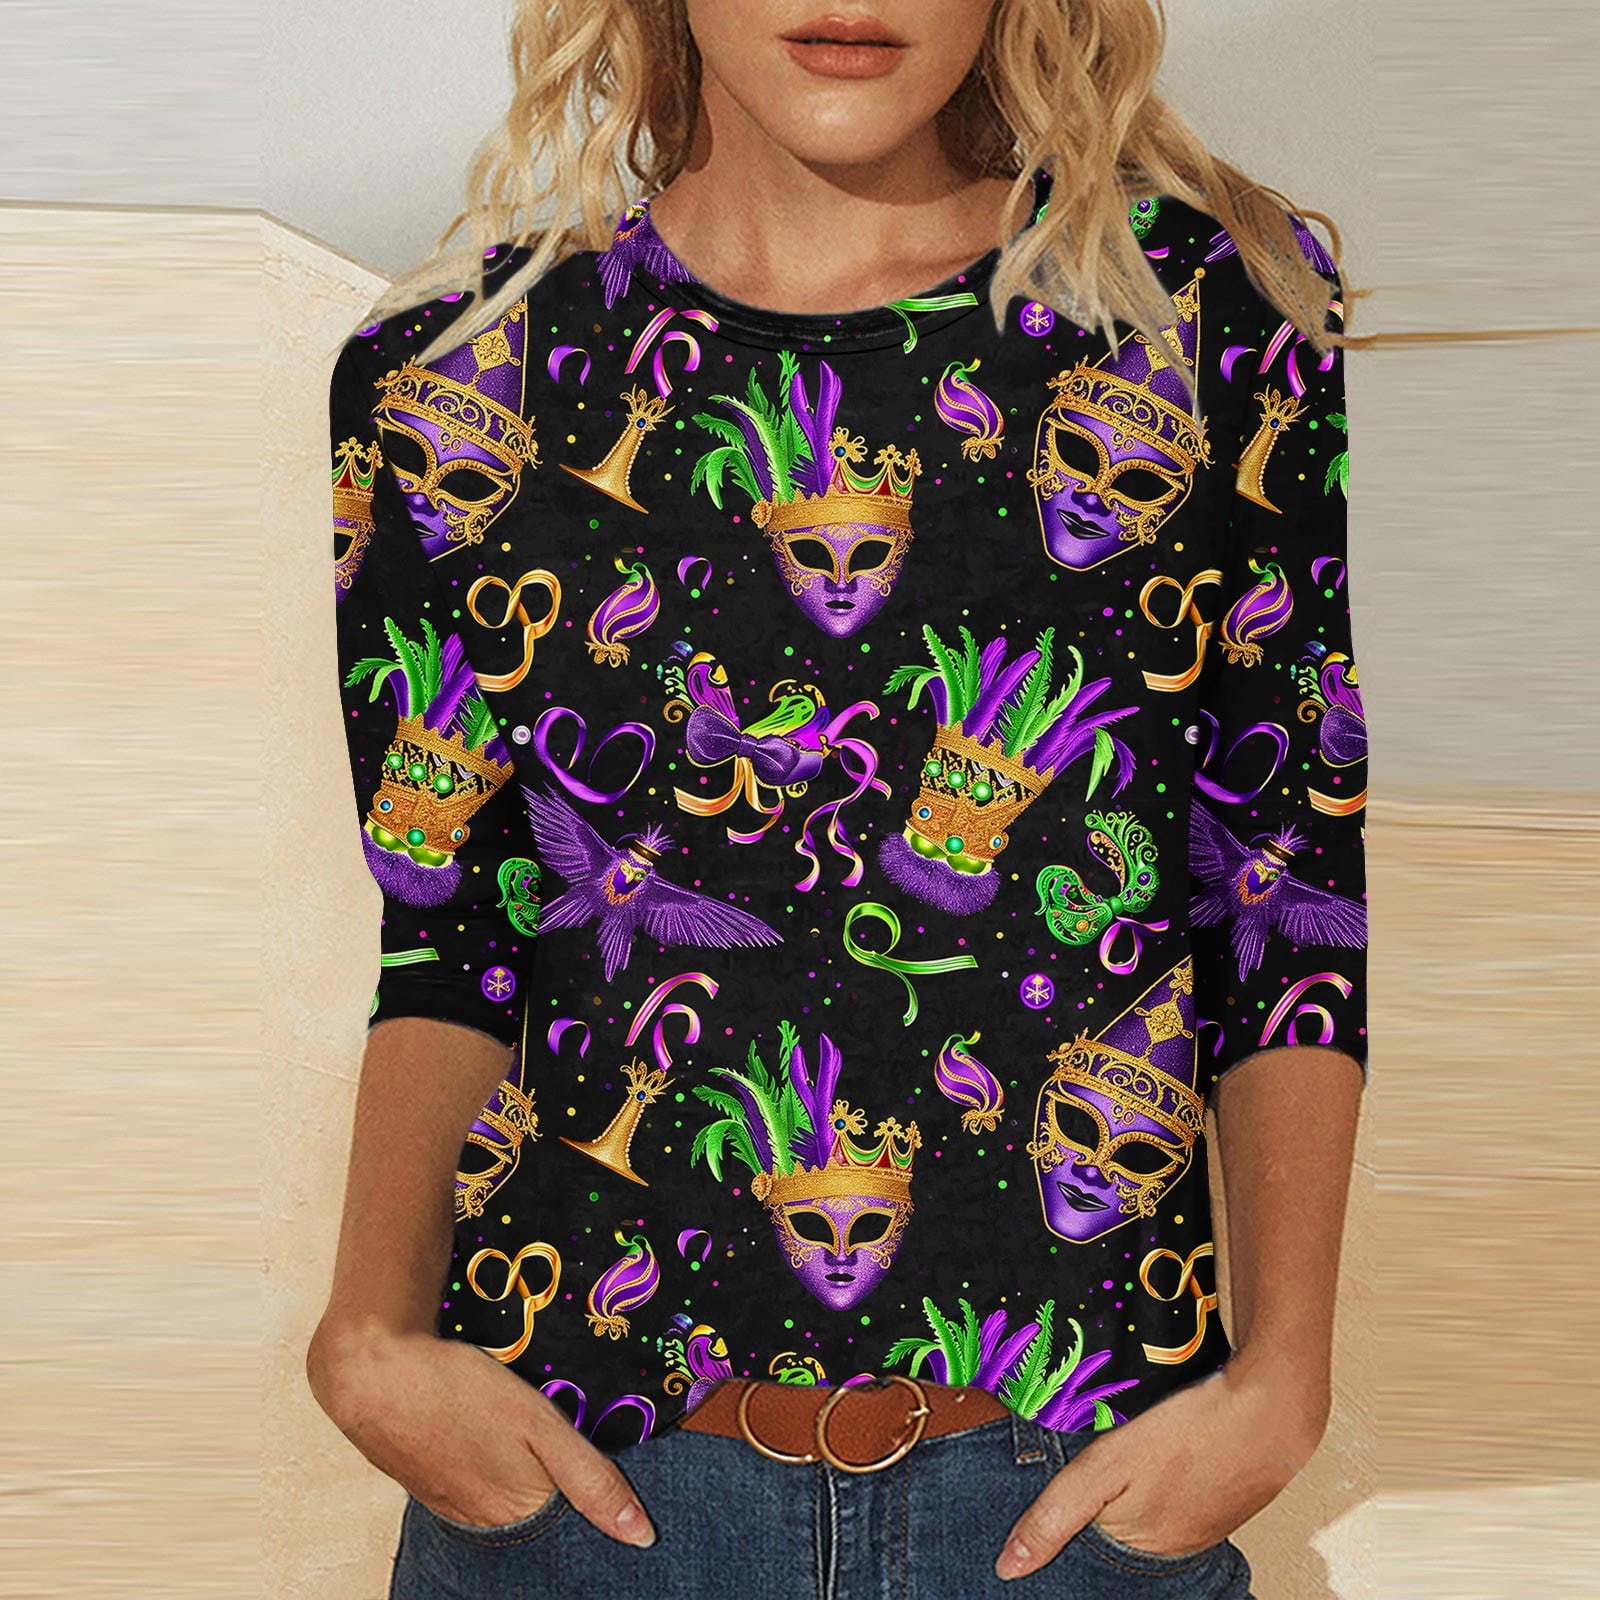 Mardi Gras Shirt for Women Party Graphic Print 3/4 Sleeve Tunic Tops ...